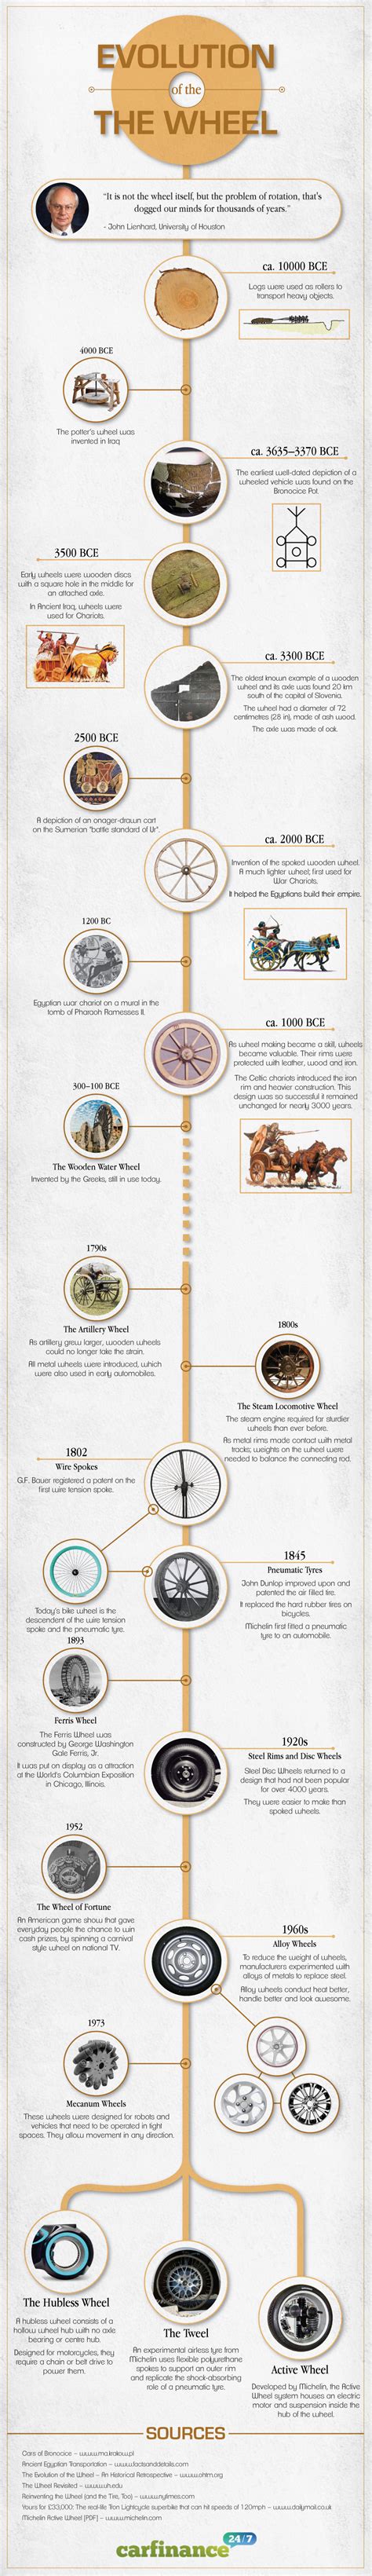 The Evolution Of The Wheel Infographic Business2community